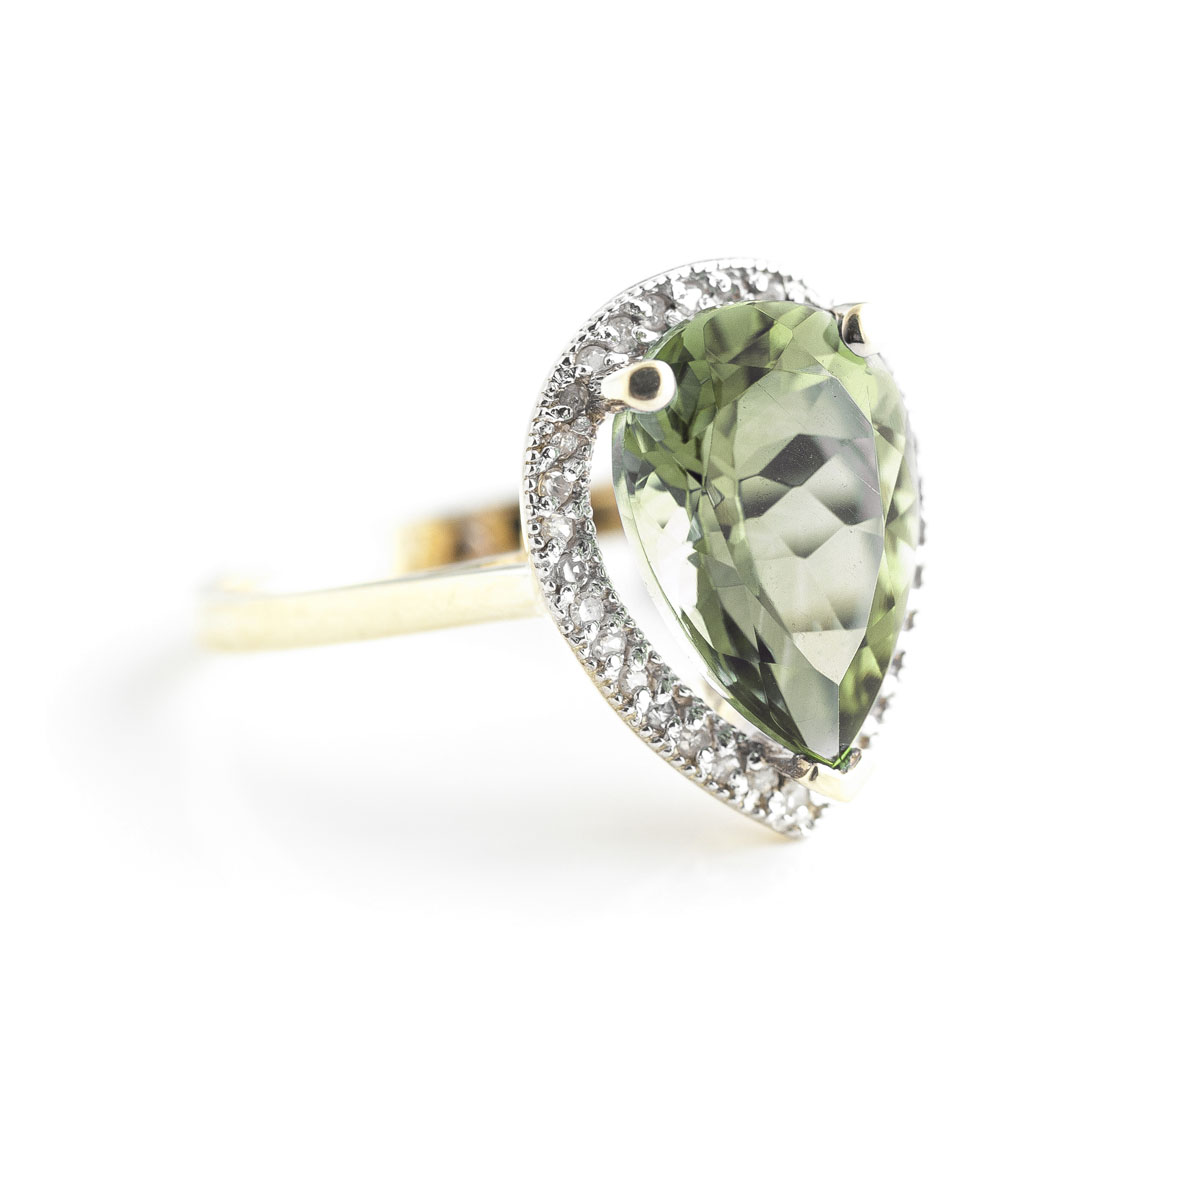 Green Amethyst Halo Ring 3.41 ctw in 9ct Gold